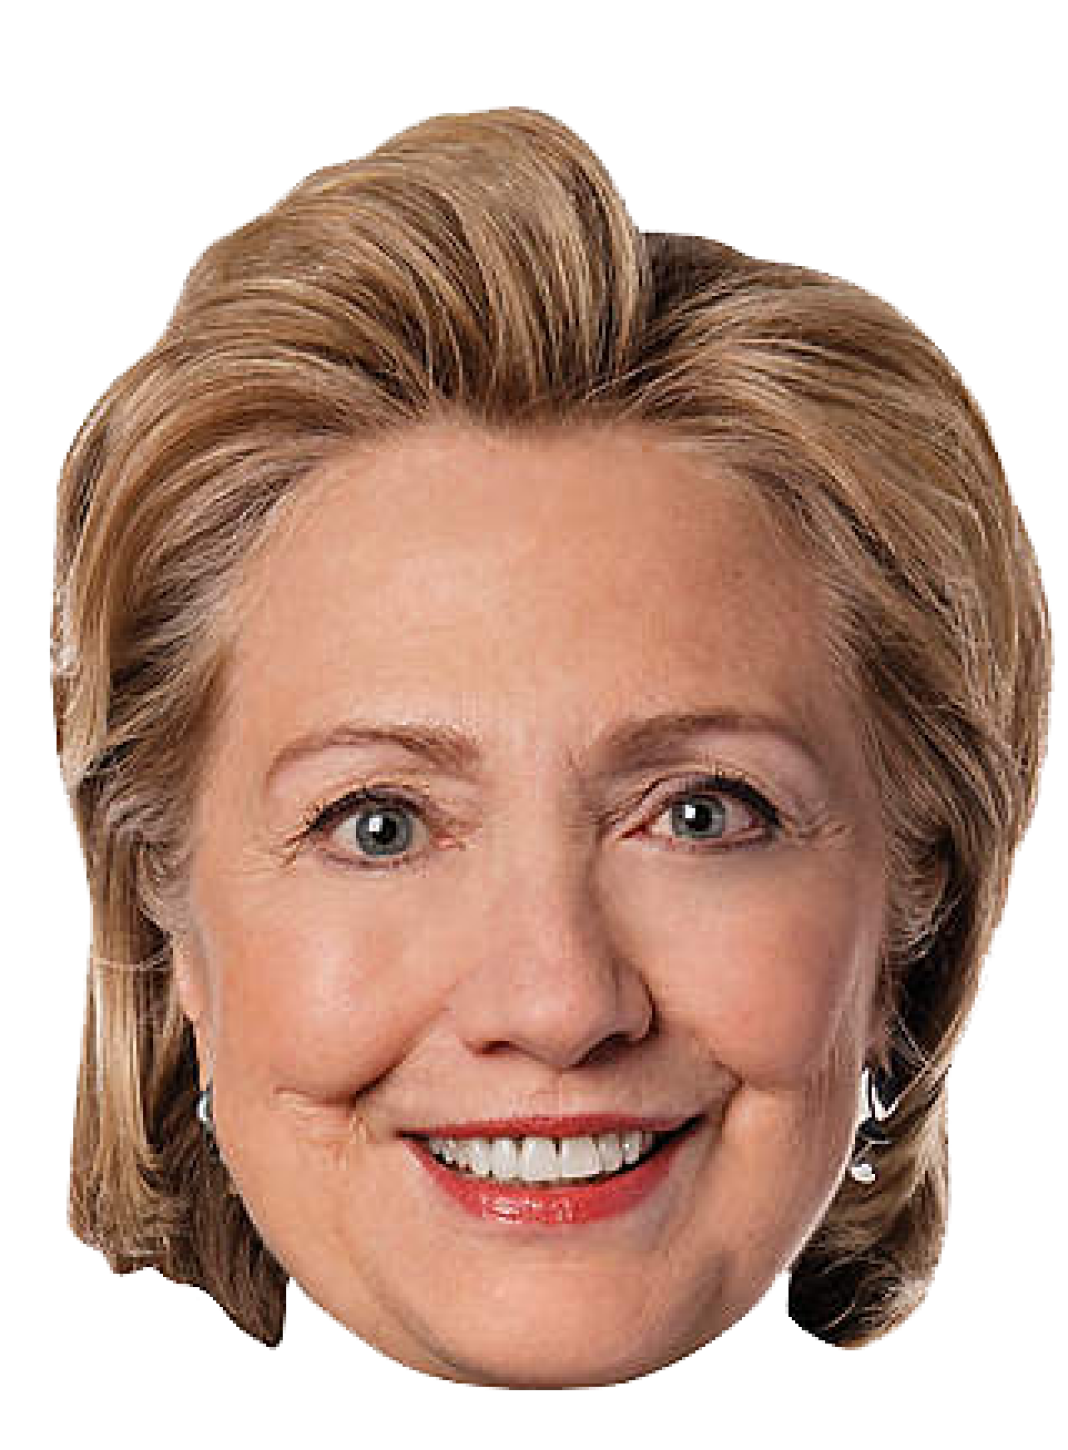 People Clinton White Face Hillary PNG